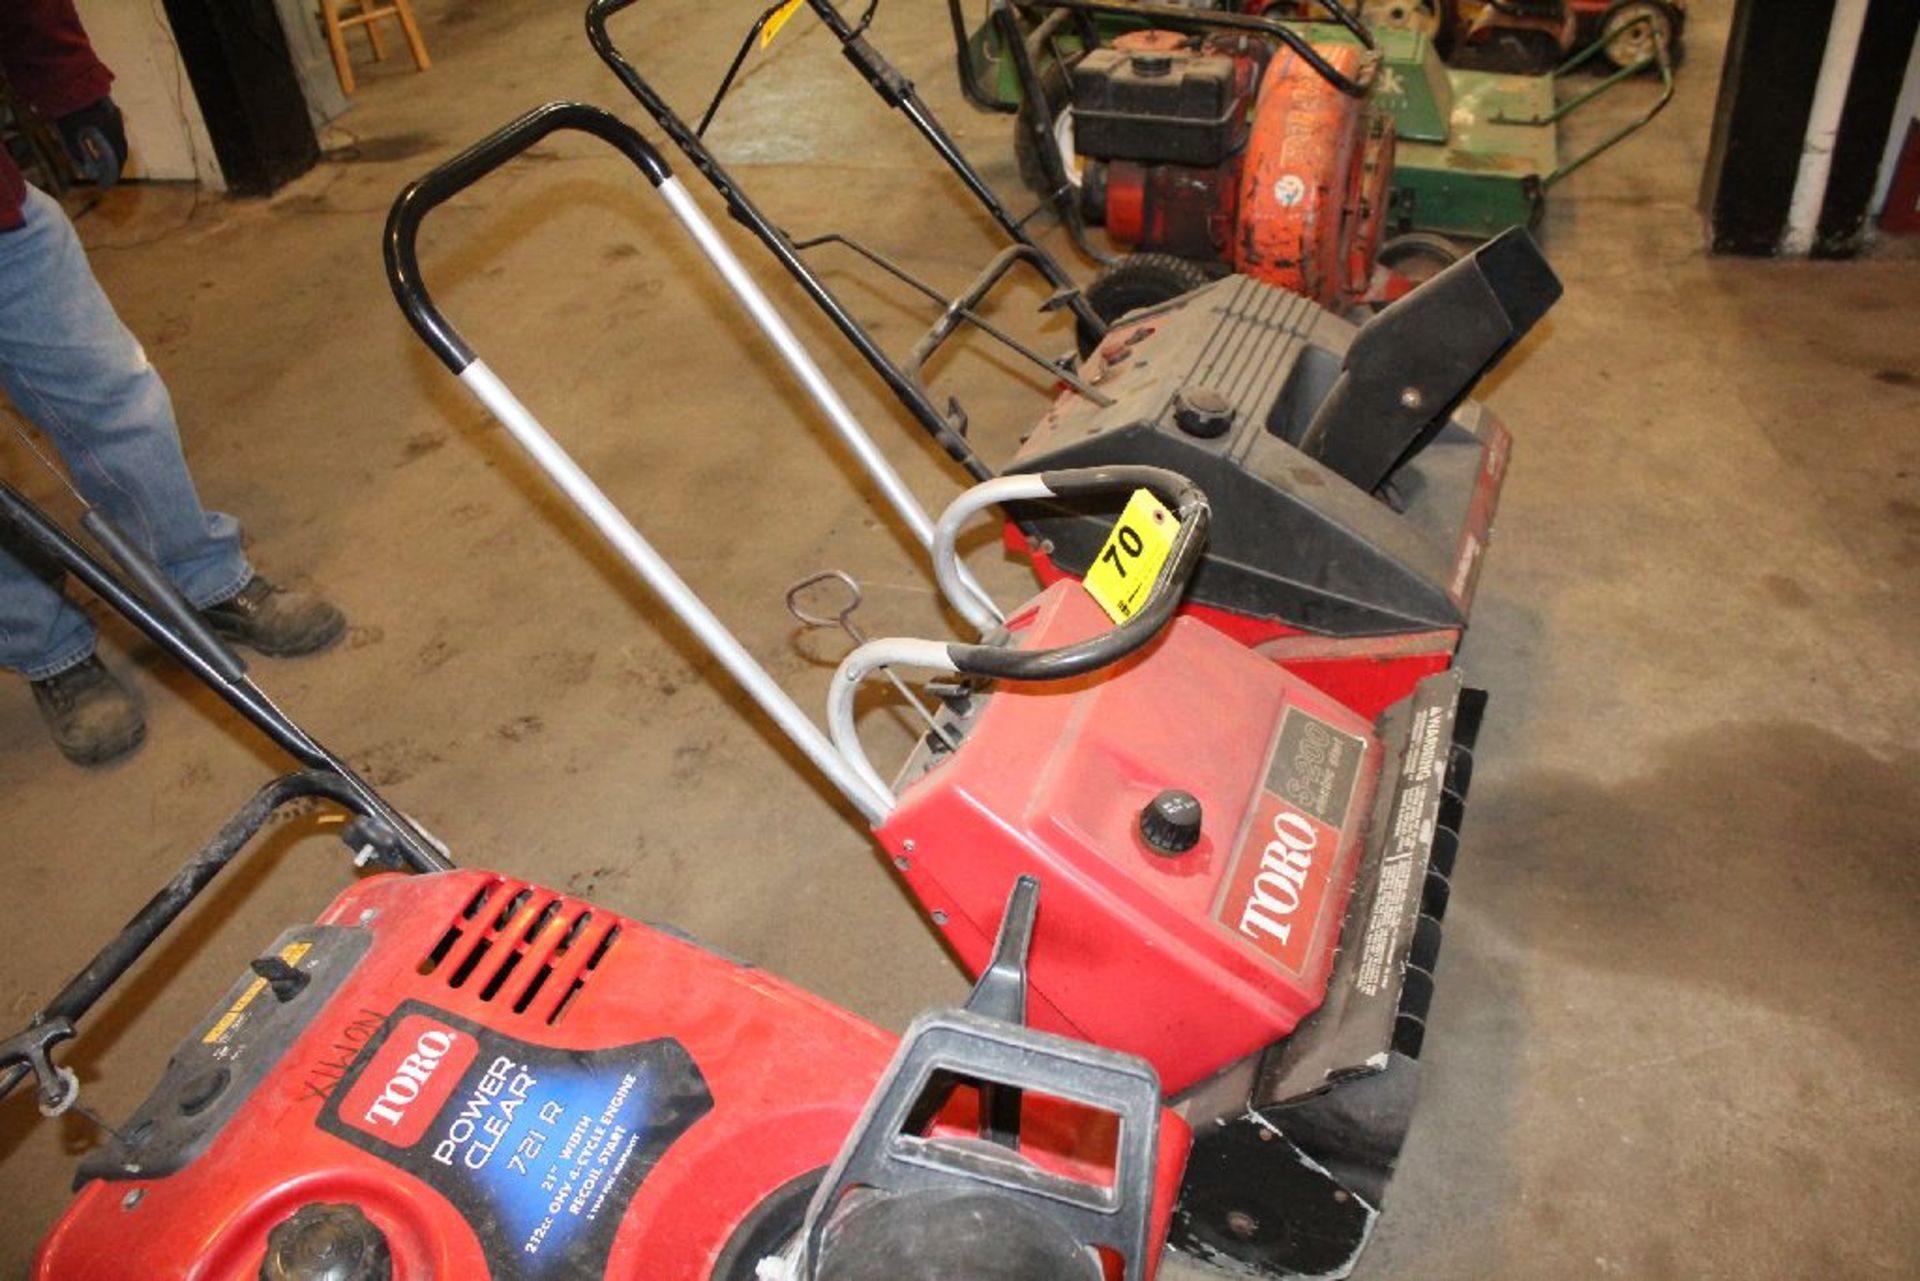 TORO MODEL S-200 20" SNOW THROWER WITH ELECTRIC START